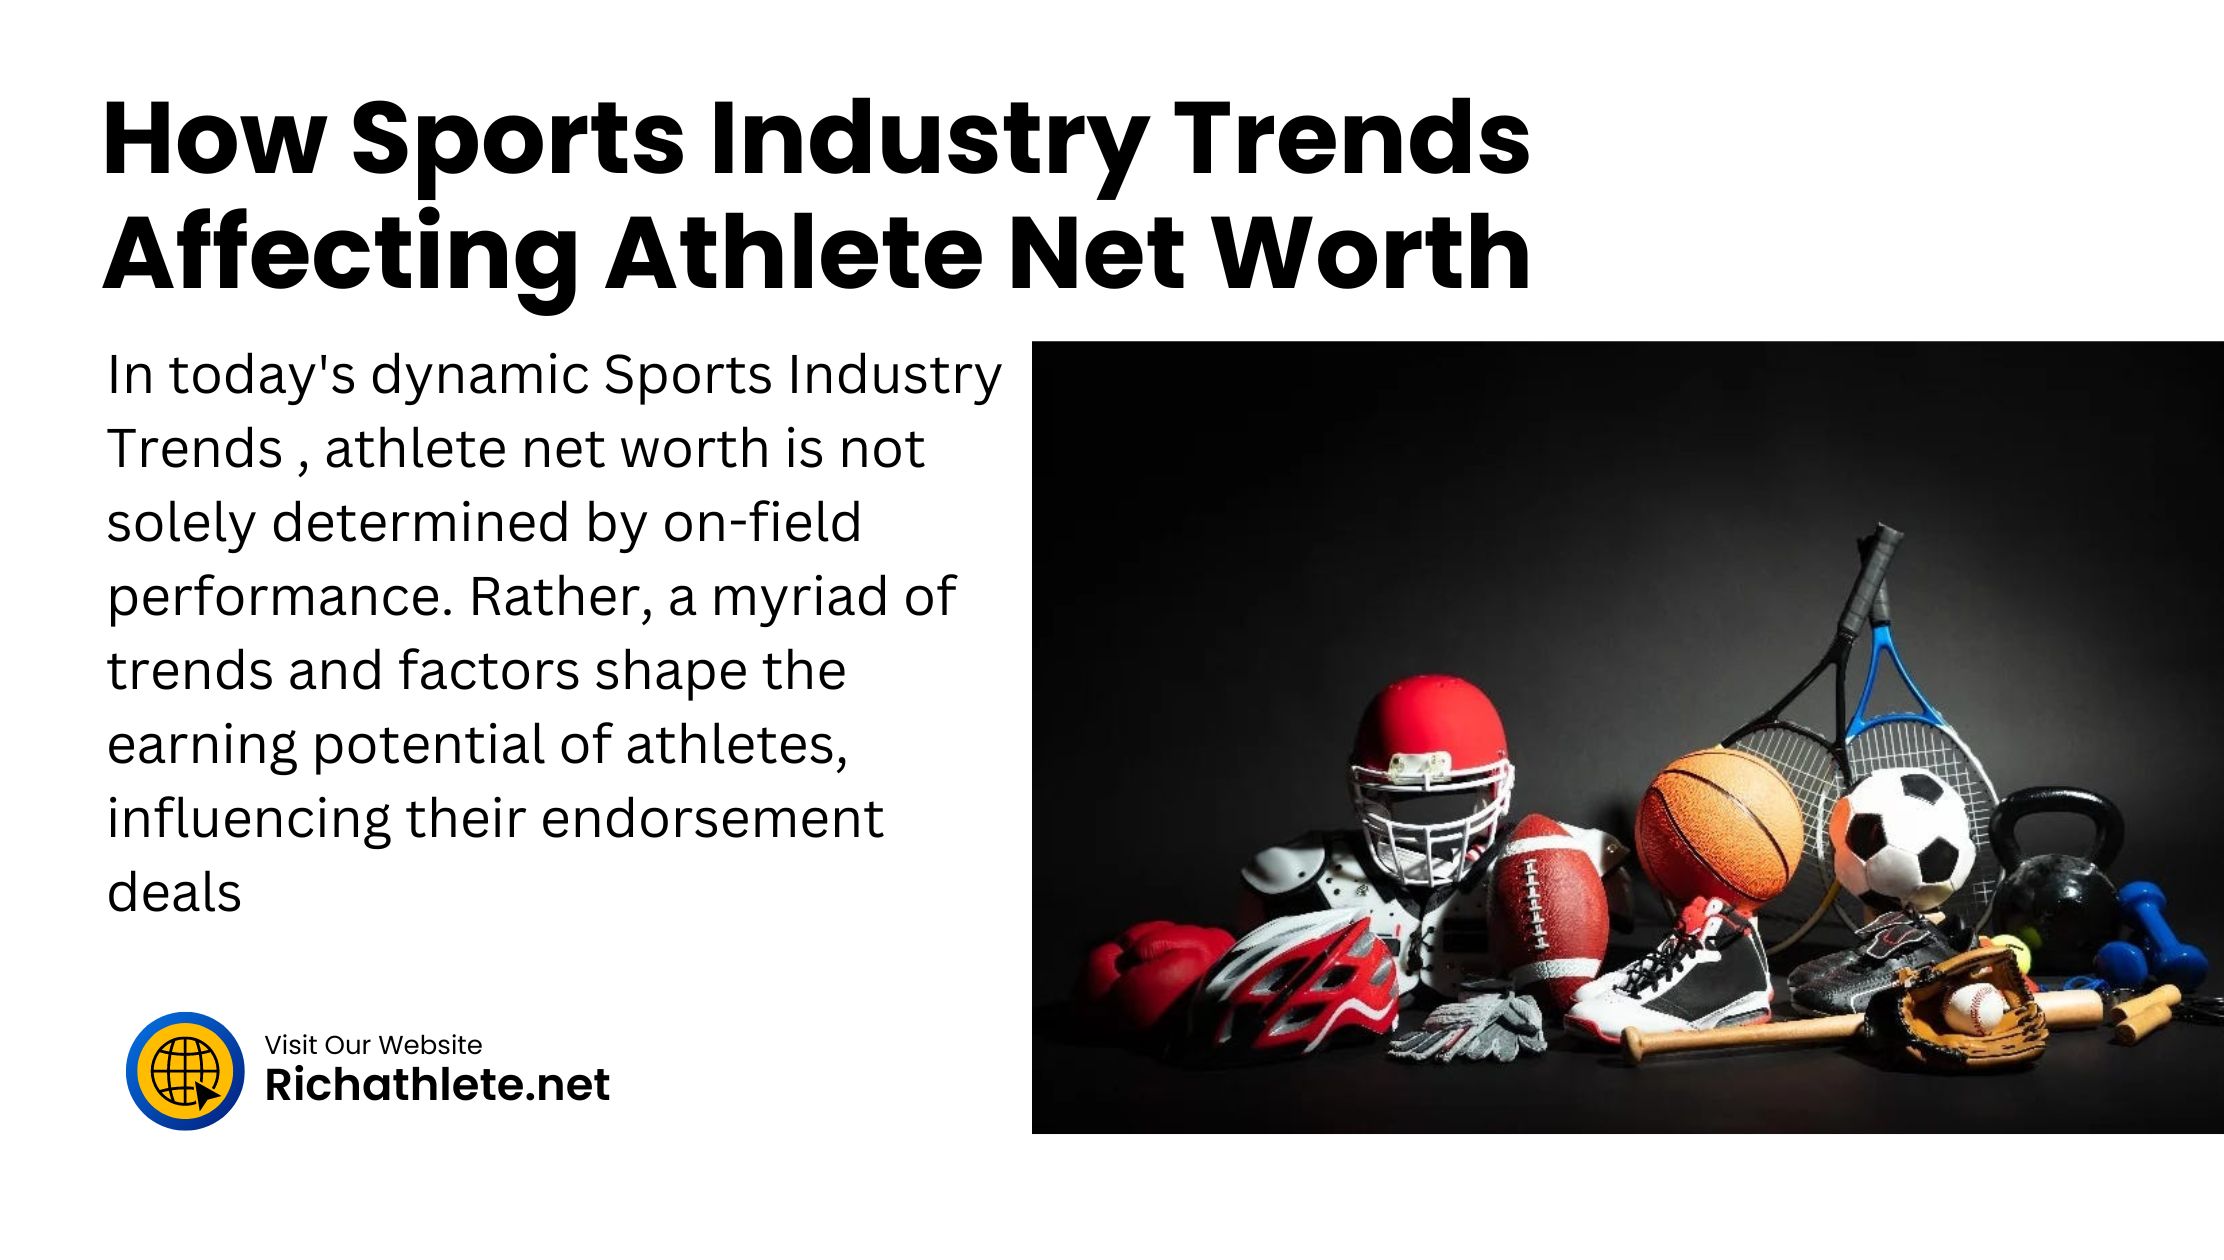 How Sports Industry Trends Affecting Athlete Net Worth